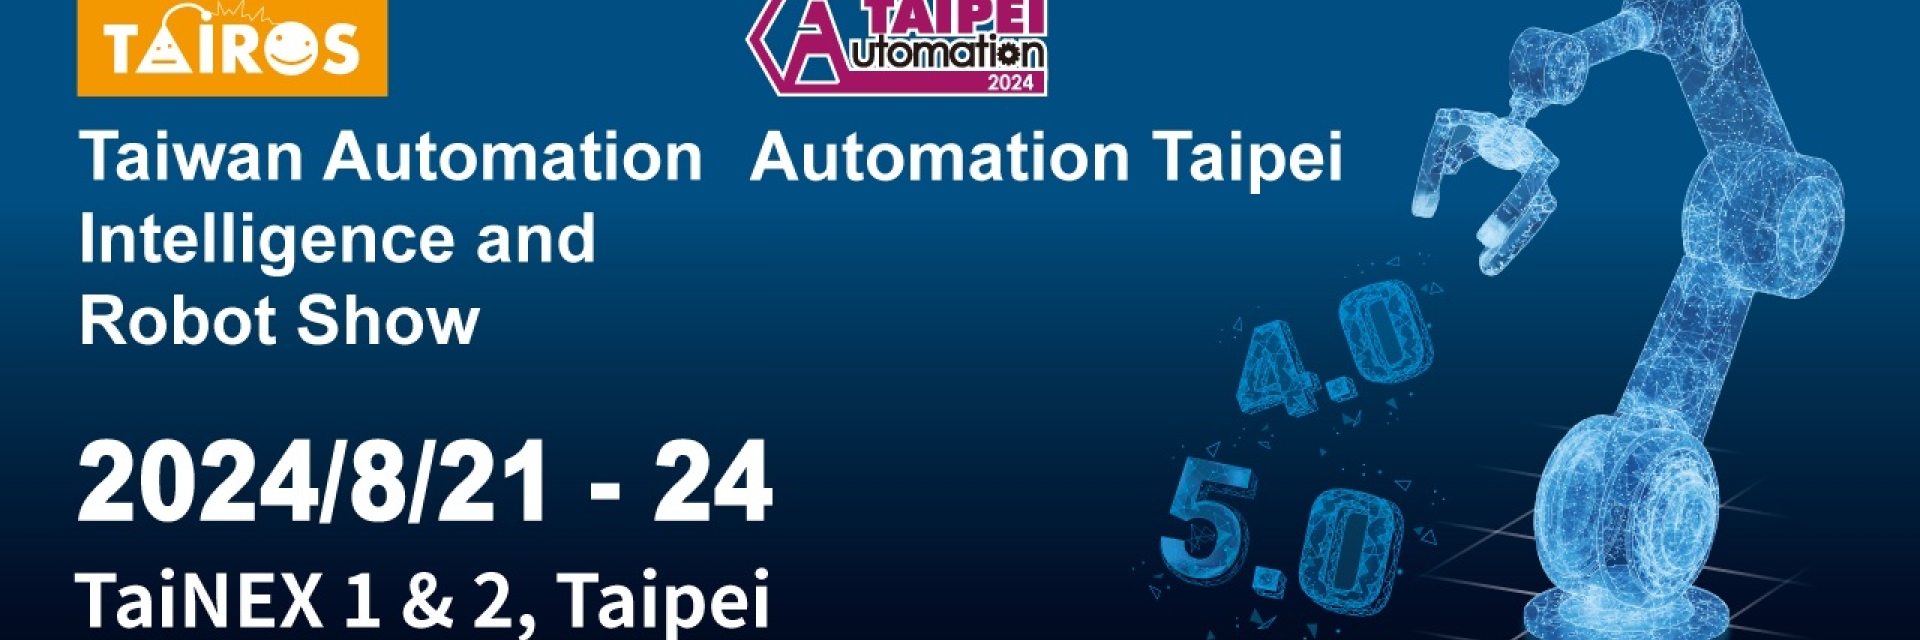 BELFOR Taiwan Exhibiting at TAIROS Taiwan Robotics and Intelligent Automation Exhibition 2024